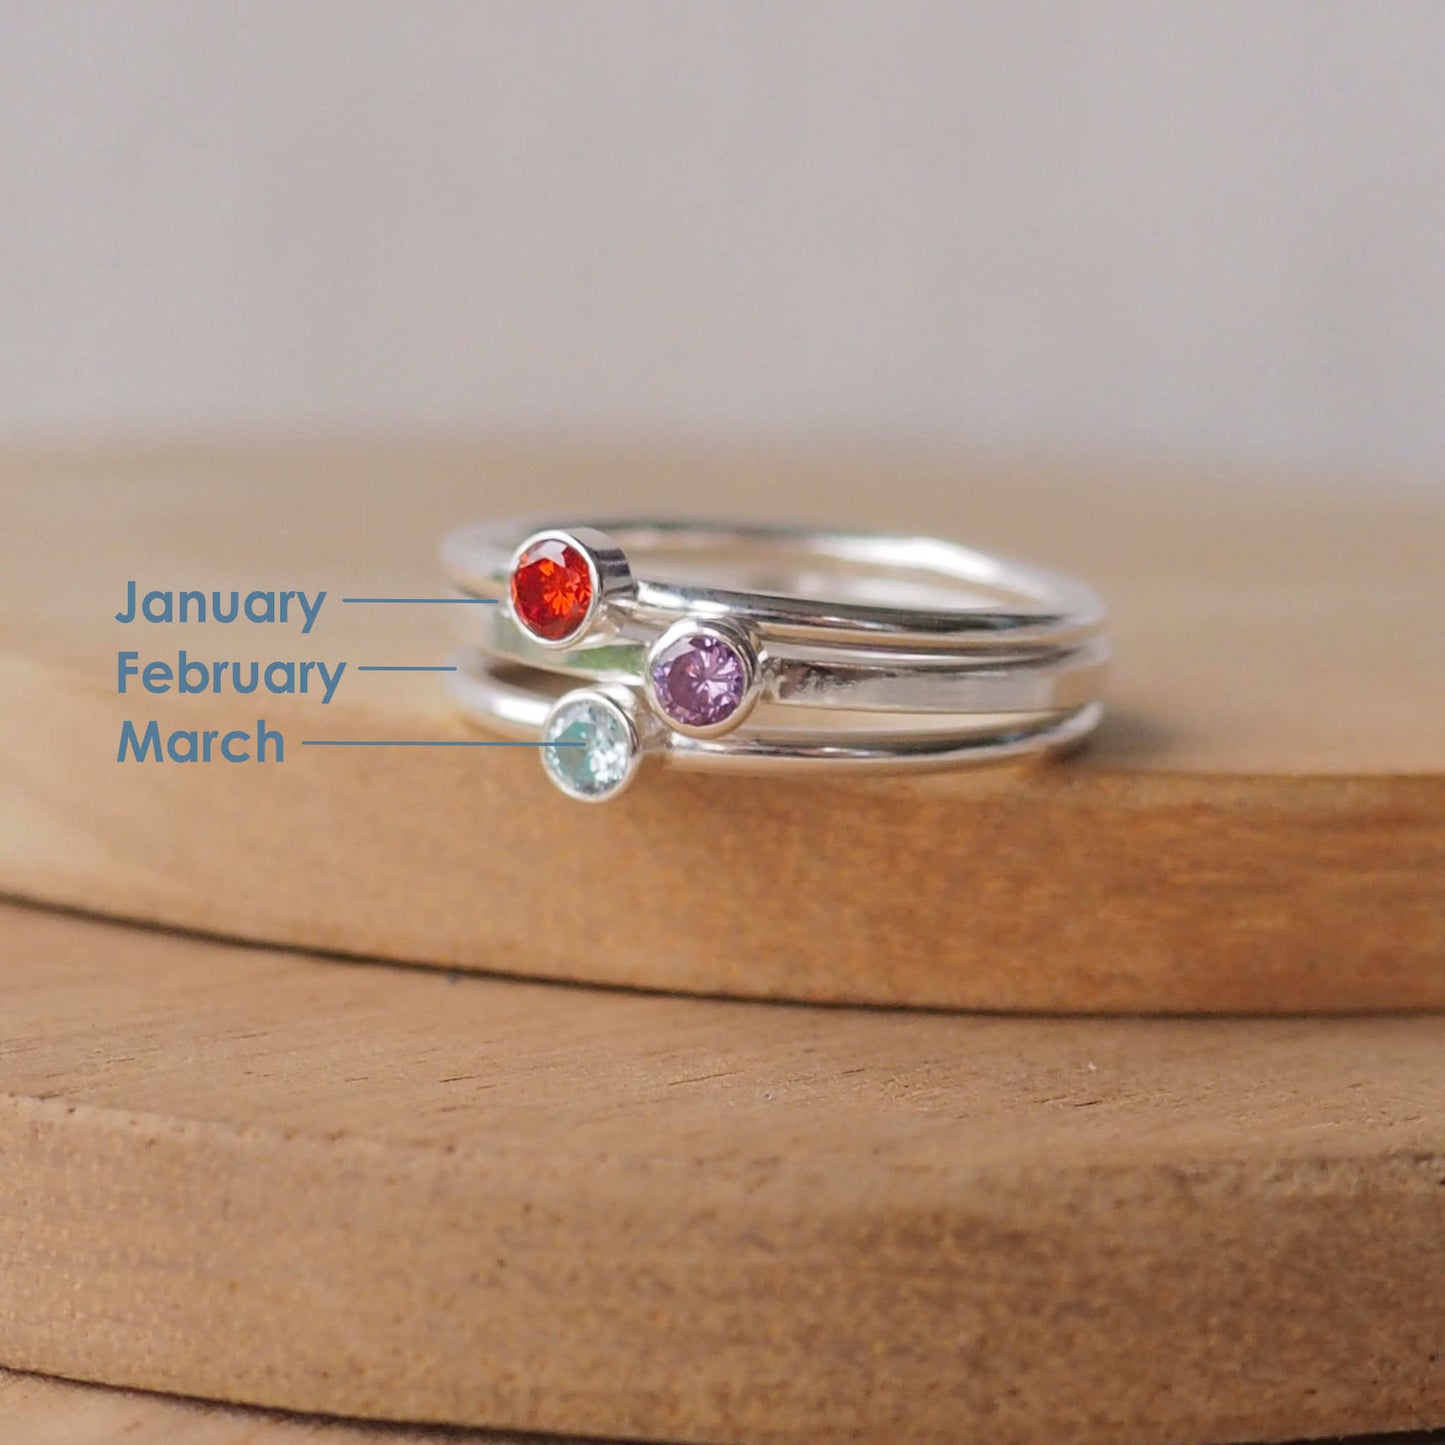 Three silver and gemstone rings with January, February and March birthstones. Silver rings with a 3mm size stone in simple style with a red, purple and aqua gemstone. Handmade in Scotland by Maram Jewellery